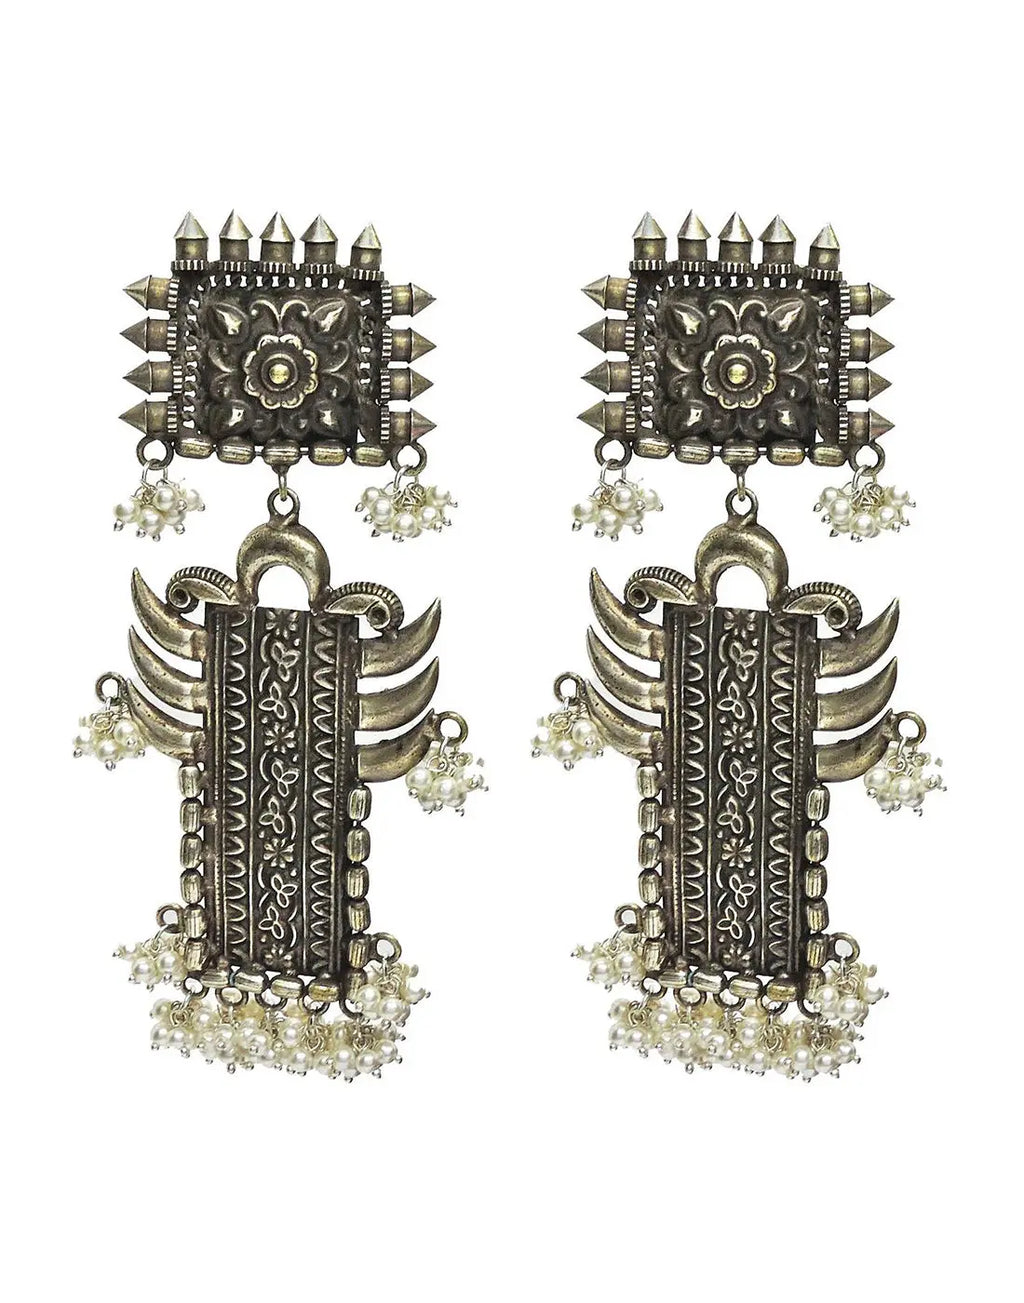 Temple Earrings- Handcrafted Jewellery from Dori